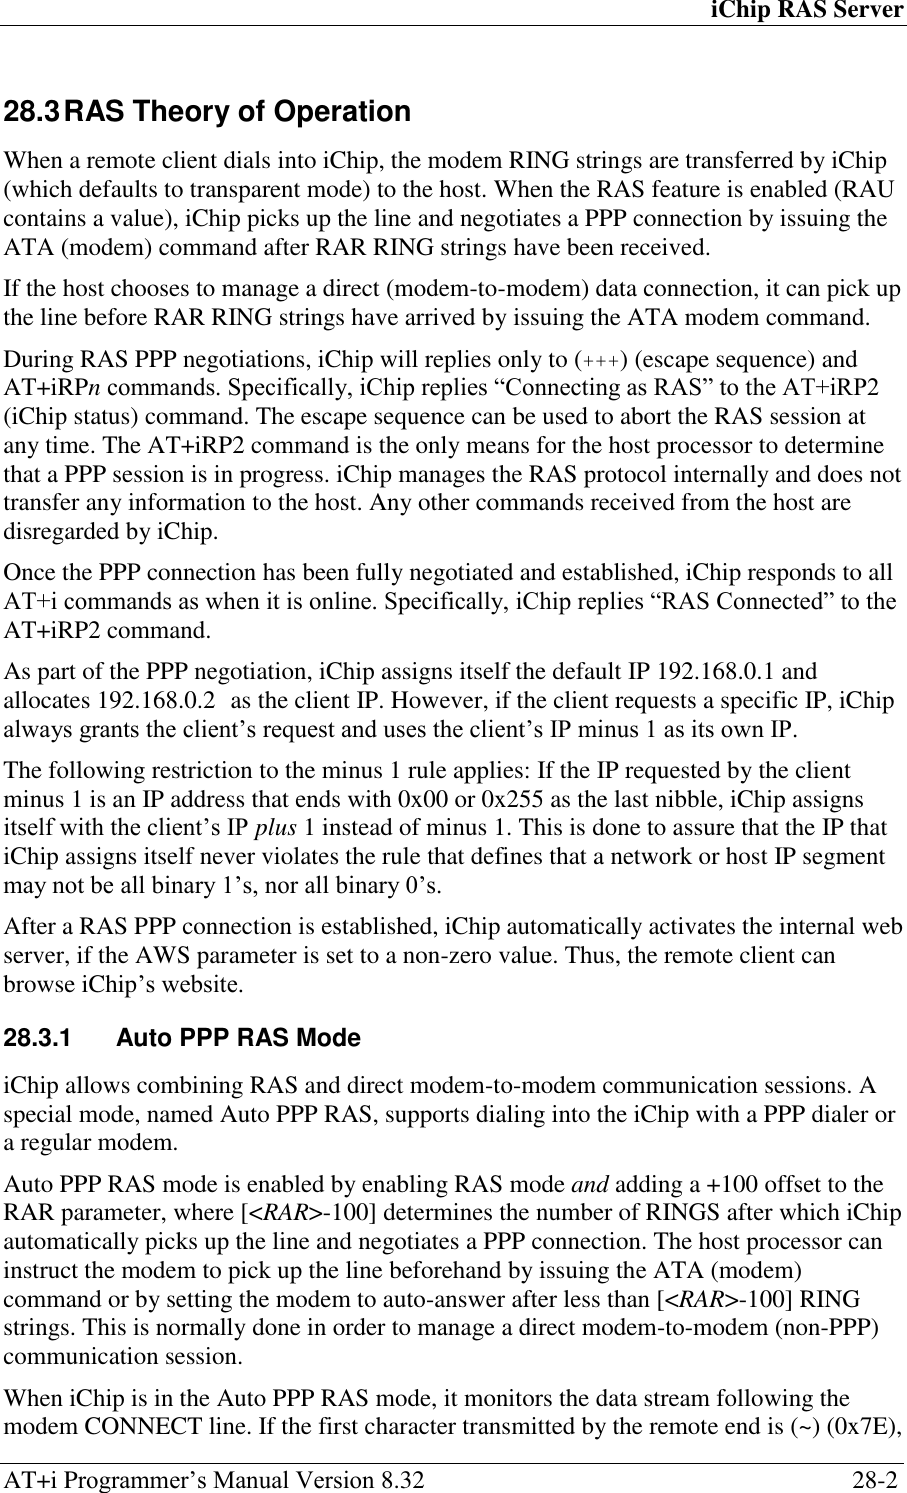 iChip RAS Server AT+i Programmer‘s Manual Version 8.32  28-2 28.3 RAS Theory of Operation When a remote client dials into iChip, the modem RING strings are transferred by iChip (which defaults to transparent mode) to the host. When the RAS feature is enabled (RAU contains a value), iChip picks up the line and negotiates a PPP connection by issuing the ATA (modem) command after RAR RING strings have been received. If the host chooses to manage a direct (modem-to-modem) data connection, it can pick up the line before RAR RING strings have arrived by issuing the ATA modem command. During RAS PPP negotiations, iChip will replies only to (+++) (escape sequence) and AT+iRPn commands. Specifically, iChip replies ―Connecting as RAS‖ to the AT+iRP2 (iChip status) command. The escape sequence can be used to abort the RAS session at any time. The AT+iRP2 command is the only means for the host processor to determine that a PPP session is in progress. iChip manages the RAS protocol internally and does not transfer any information to the host. Any other commands received from the host are disregarded by iChip. Once the PPP connection has been fully negotiated and established, iChip responds to all AT+i commands as when it is online. Specifically, iChip replies ―RAS Connected‖ to the AT+iRP2 command. As part of the PPP negotiation, iChip assigns itself the default IP 192.168.0.1 and allocates 192.168.0.2 as the client IP. However, if the client requests a specific IP, iChip always grants the client‘s request and uses the client‘s IP minus 1 as its own IP. The following restriction to the minus 1 rule applies: If the IP requested by the client minus 1 is an IP address that ends with 0x00 or 0x255 as the last nibble, iChip assigns itself with the client‘s IP plus 1 instead of minus 1. This is done to assure that the IP that iChip assigns itself never violates the rule that defines that a network or host IP segment may not be all binary 1‘s, nor all binary 0‘s. After a RAS PPP connection is established, iChip automatically activates the internal web server, if the AWS parameter is set to a non-zero value. Thus, the remote client can browse iChip‘s website. 28.3.1  Auto PPP RAS Mode iChip allows combining RAS and direct modem-to-modem communication sessions. A special mode, named Auto PPP RAS, supports dialing into the iChip with a PPP dialer or a regular modem. Auto PPP RAS mode is enabled by enabling RAS mode and adding a +100 offset to the RAR parameter, where [&lt;RAR&gt;-100] determines the number of RINGS after which iChip automatically picks up the line and negotiates a PPP connection. The host processor can instruct the modem to pick up the line beforehand by issuing the ATA (modem) command or by setting the modem to auto-answer after less than [&lt;RAR&gt;-100] RING strings. This is normally done in order to manage a direct modem-to-modem (non-PPP) communication session. When iChip is in the Auto PPP RAS mode, it monitors the data stream following the modem CONNECT line. If the first character transmitted by the remote end is (~) (0x7E), 